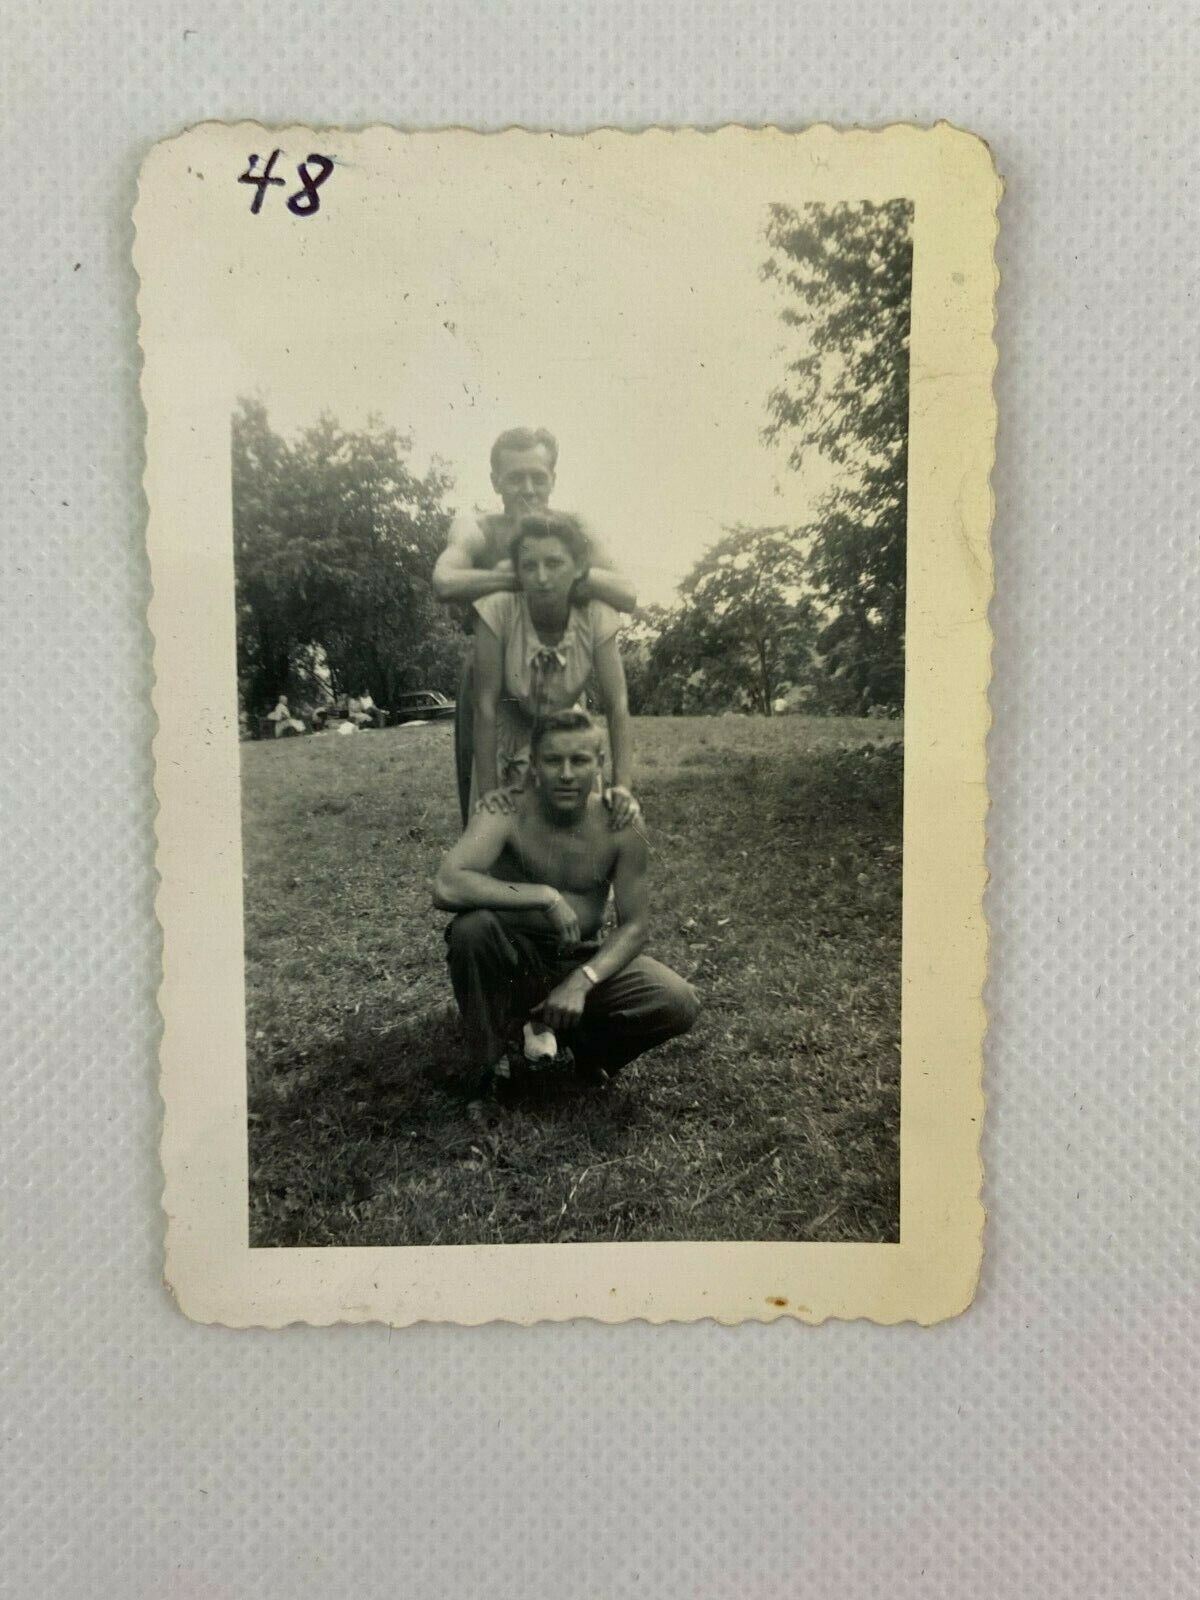 Two Shirtless Men Woman Stacked  B&W Photograph 2.5 x 3.5